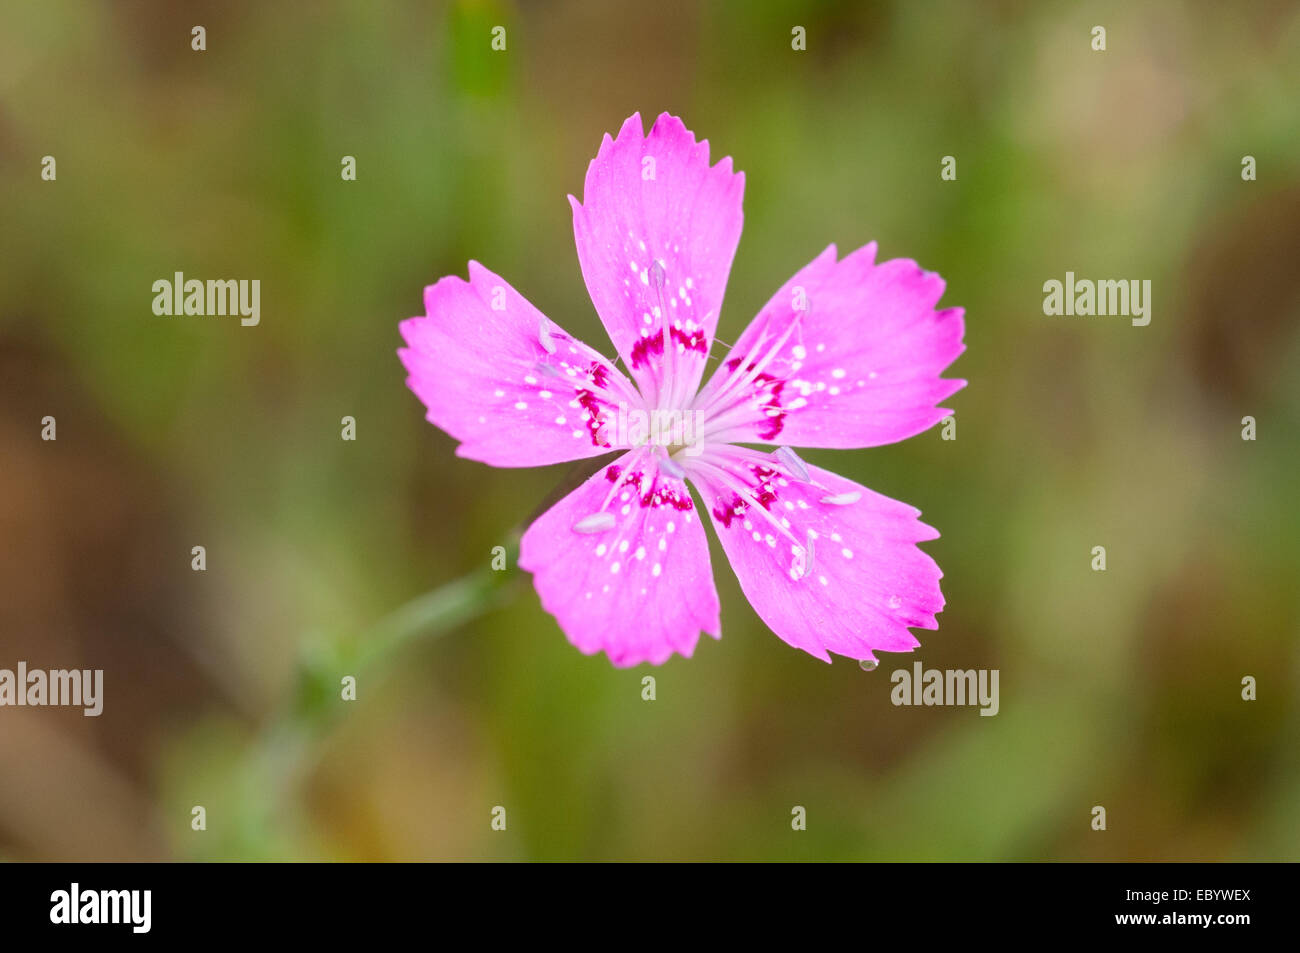 Small pink flower on the blurry background Stock Photo